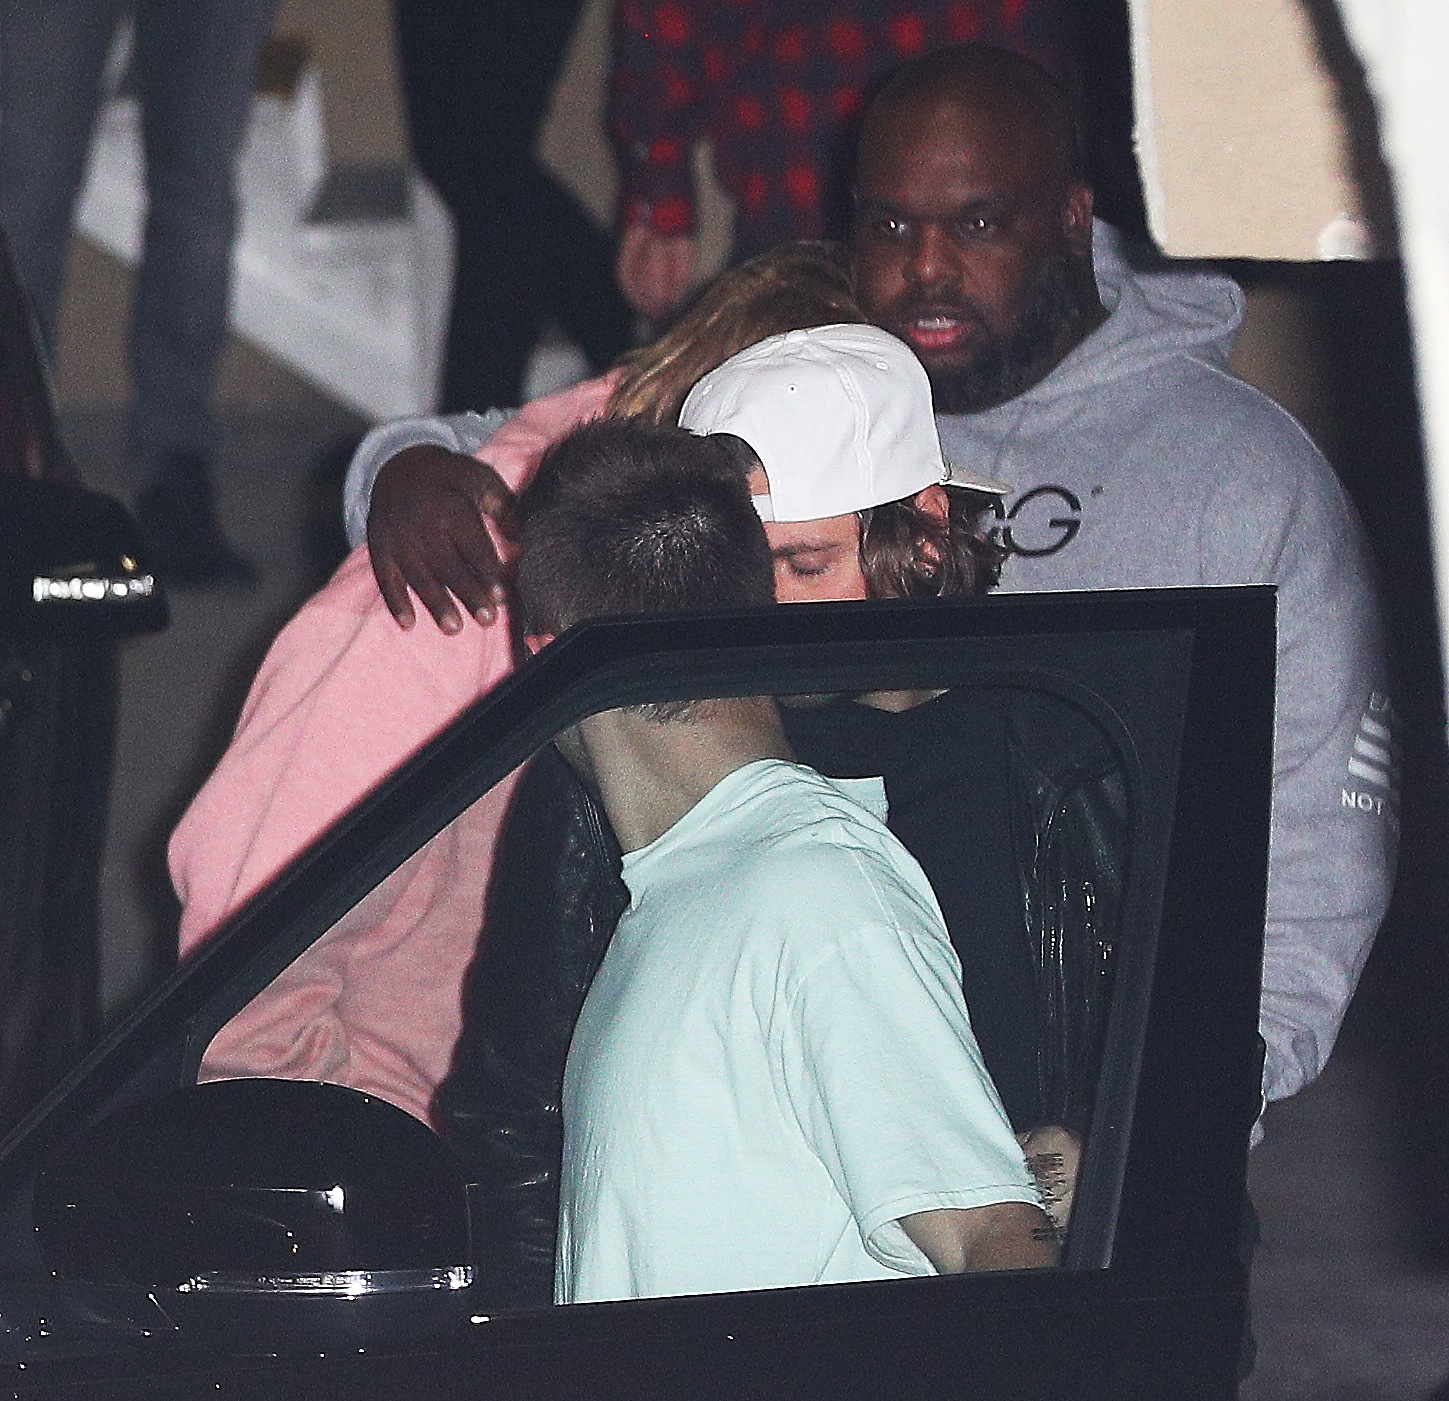 Justin Bieber gets comforted by church friends after Selena gomez news in Los Angeles, CA